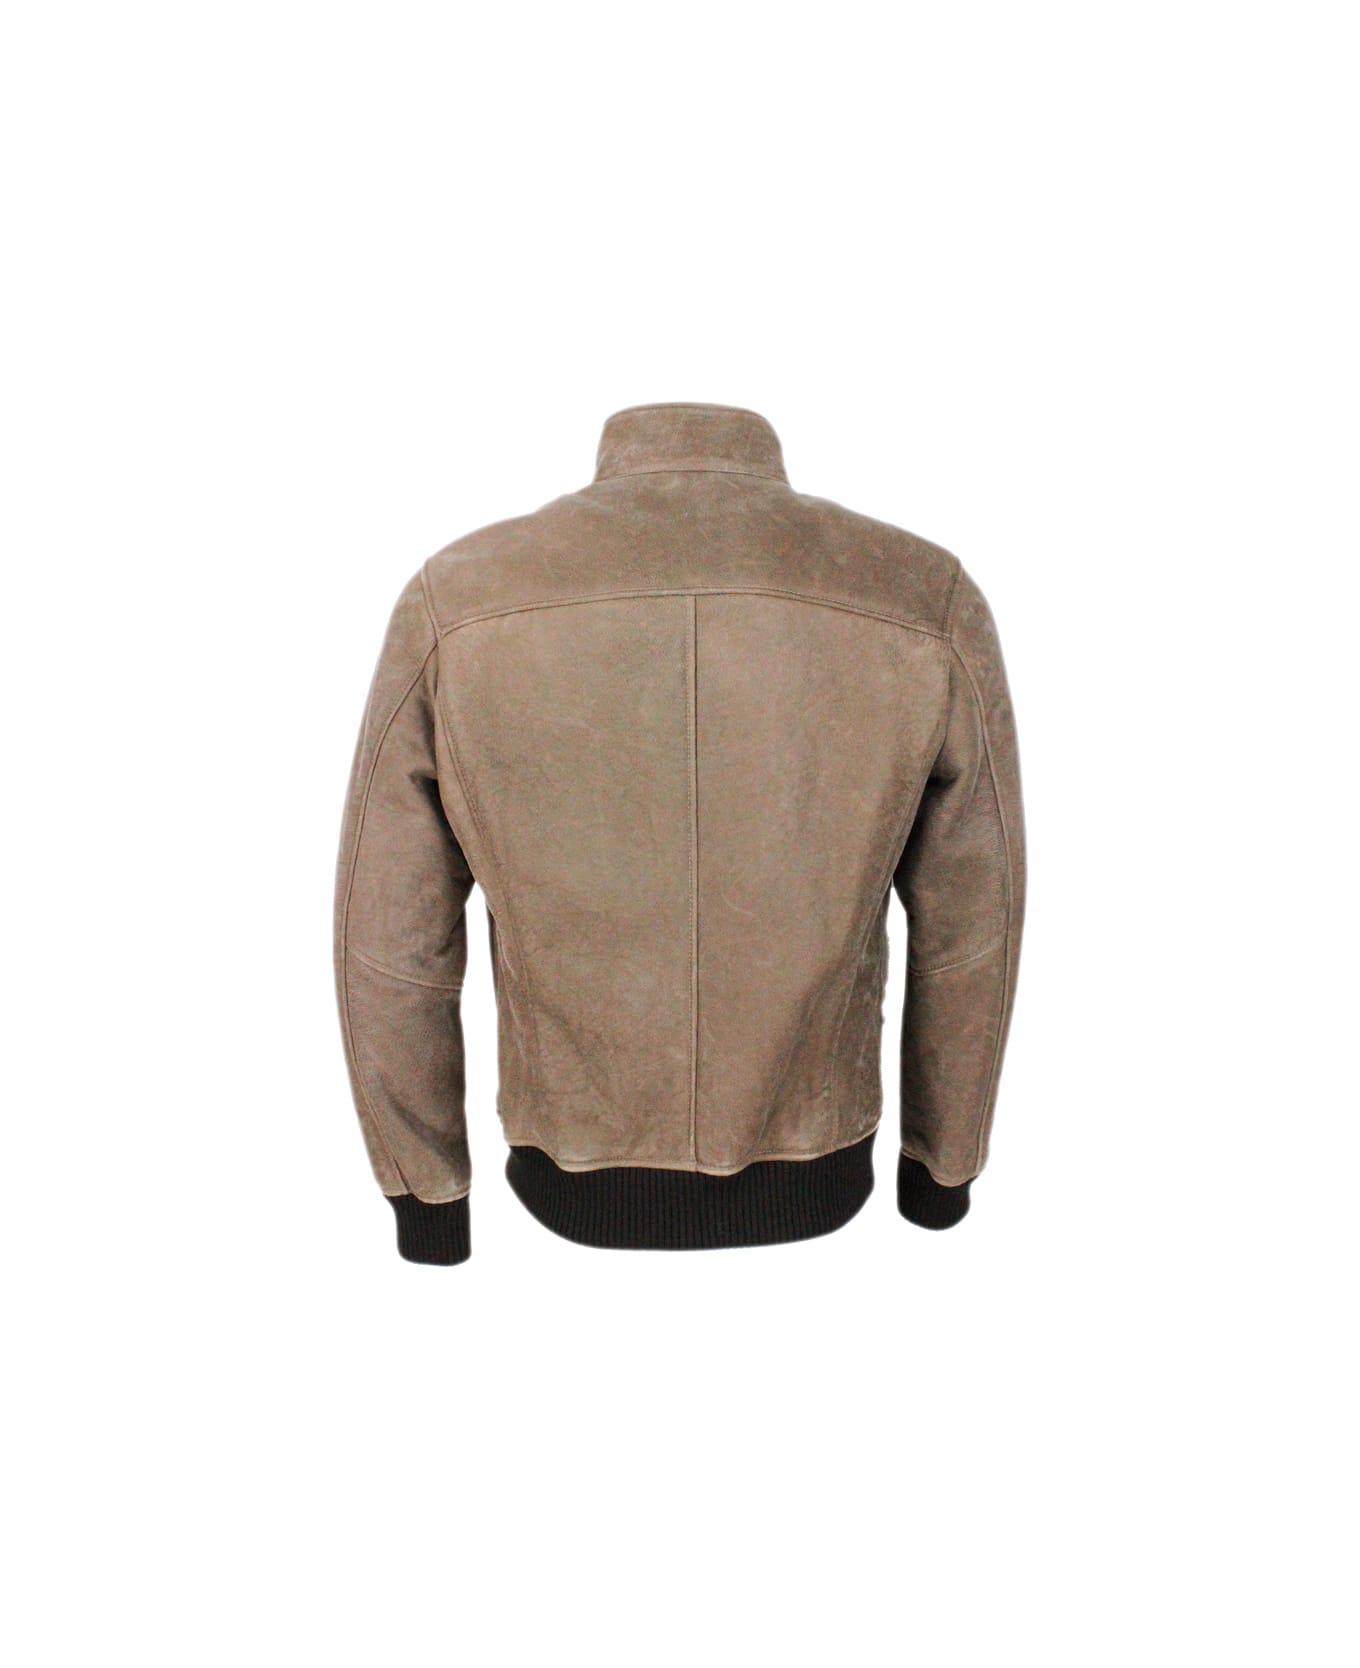 Barba Napoli Bomber Shearling Shearling Jacket With Stretch Knit Trims And Zip Closure - Taupe